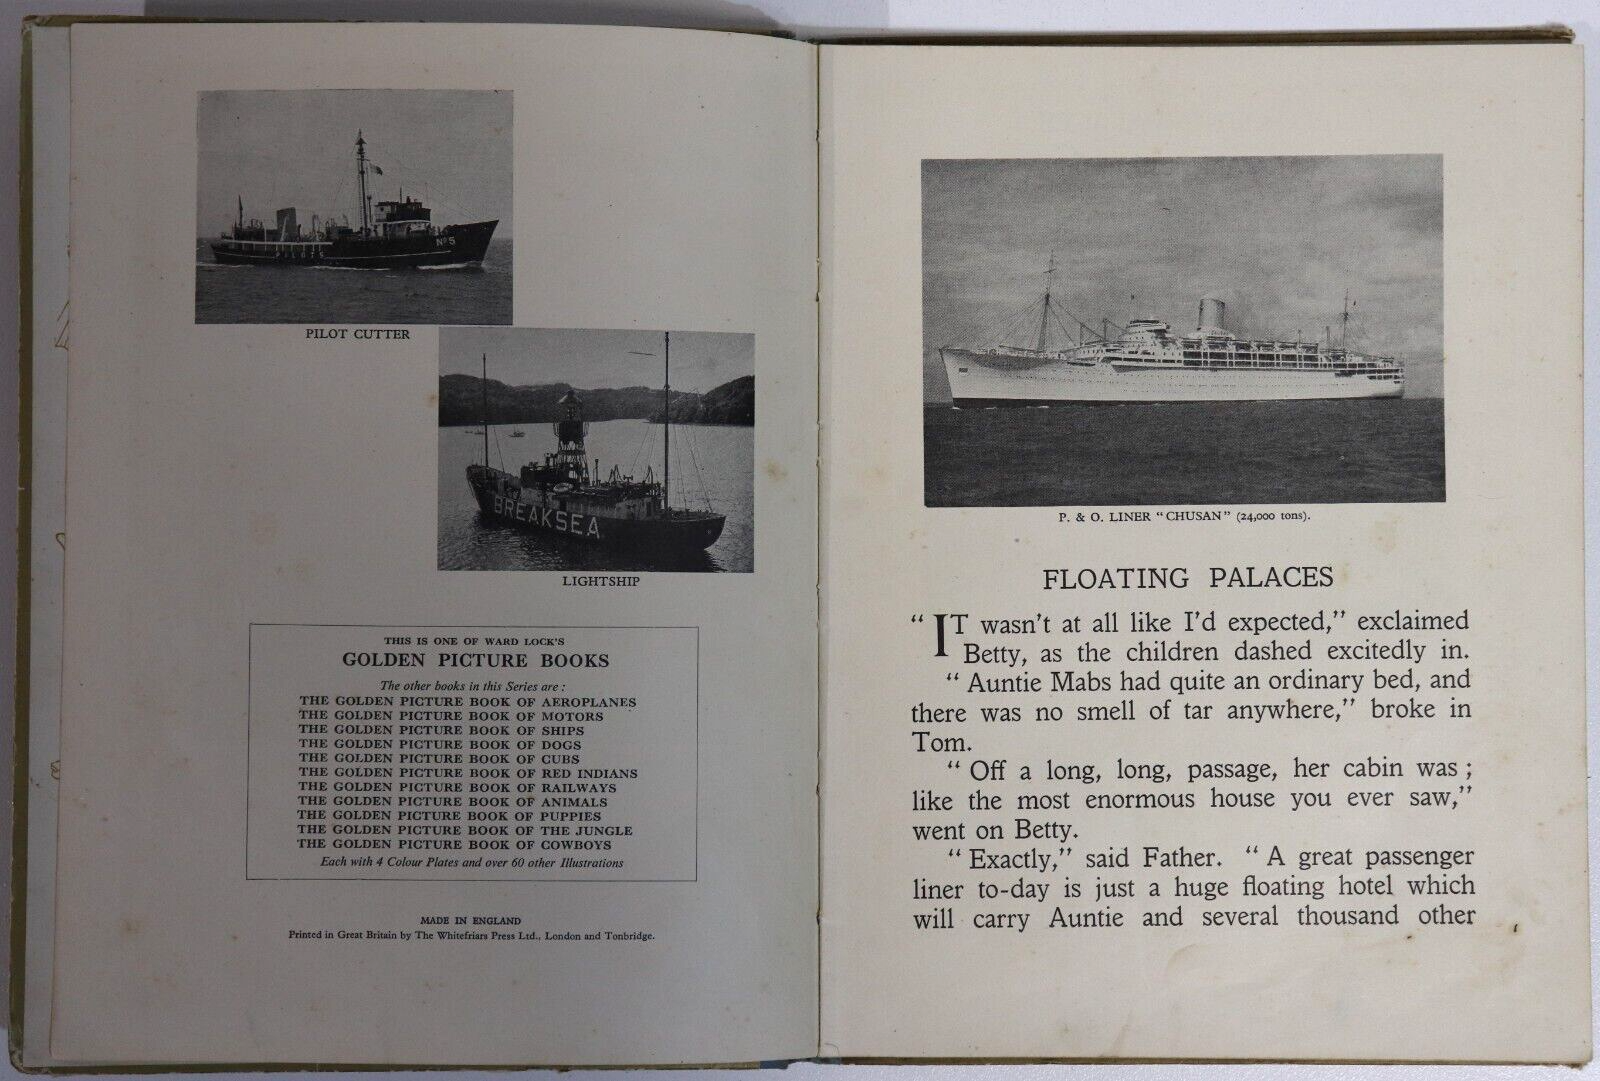 The Golden Picture Book Of Ships - c1949 - Antique Children's Maritime Book